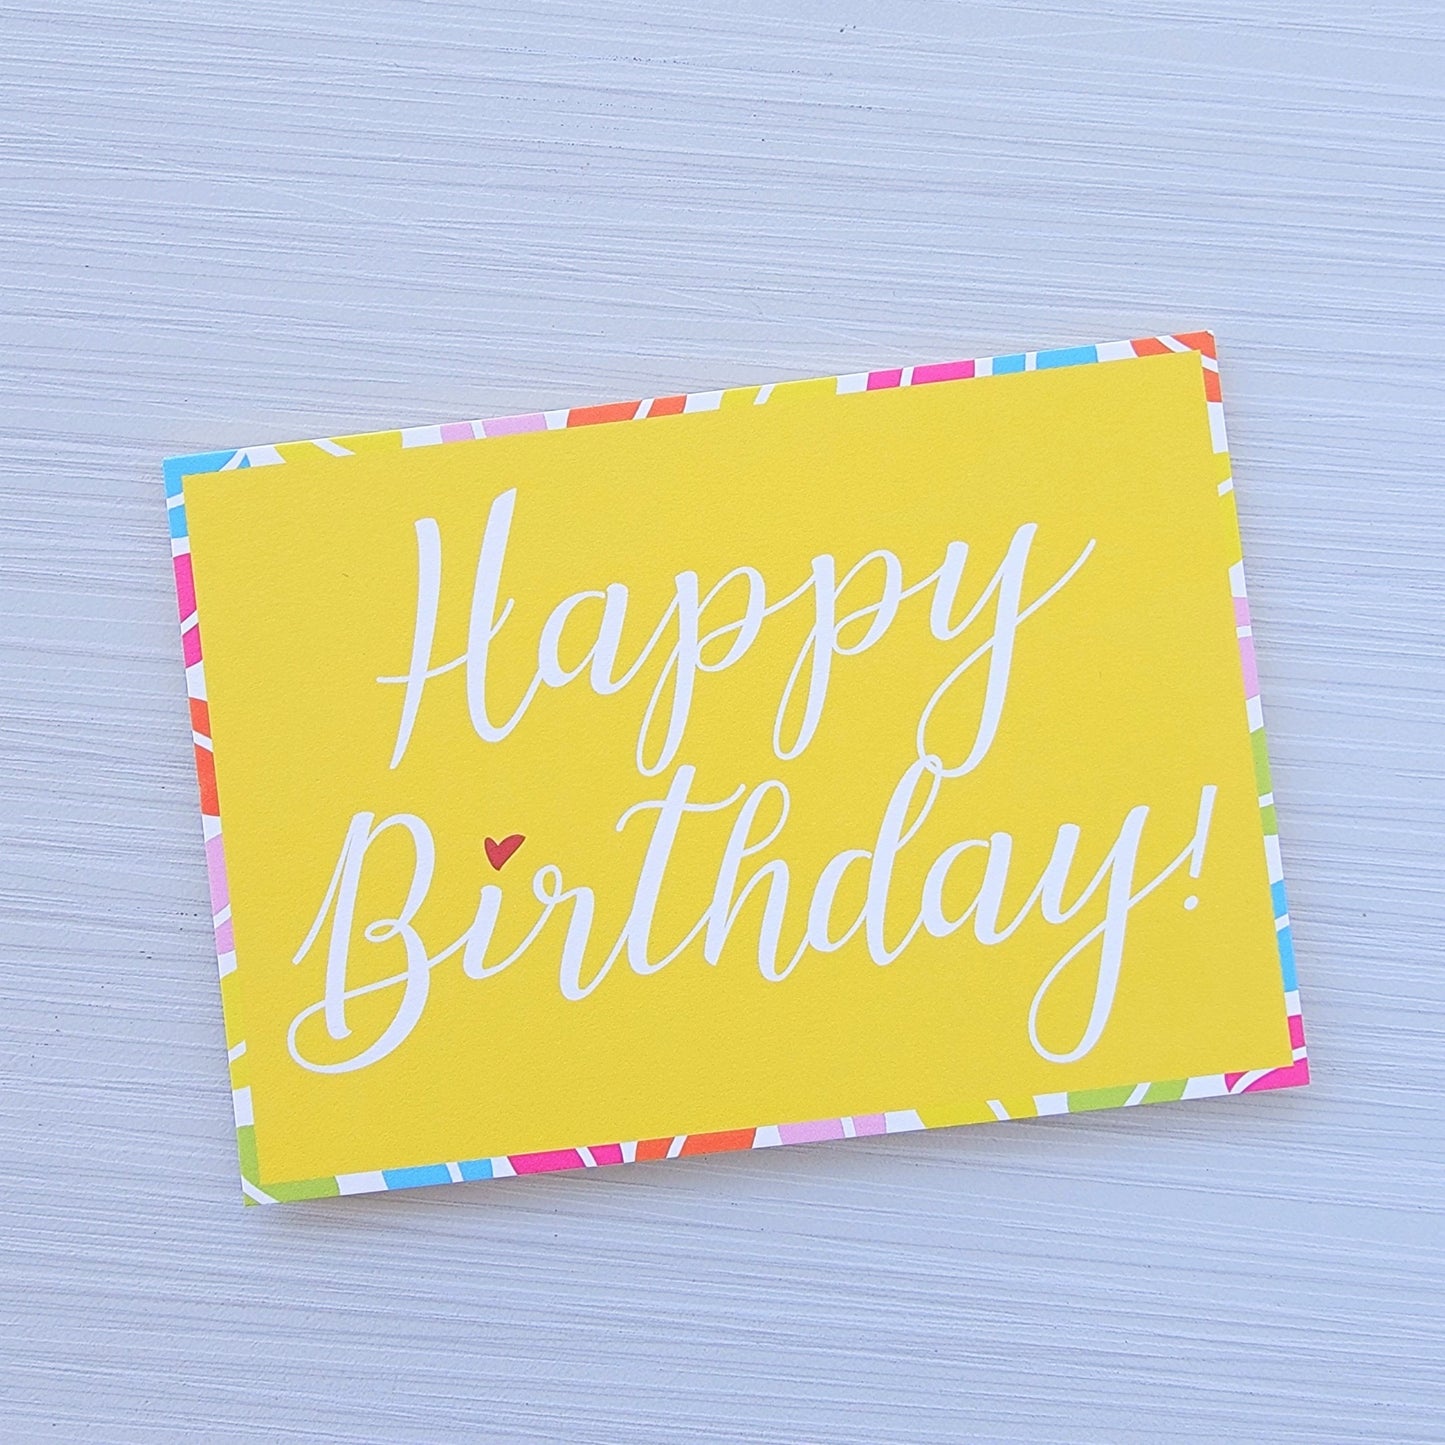 Happy birthday card for your message! - Yann Haute Patisserie, French desserts and bakery shop in Calgary. Best pastries like macarons, cakes, birthday cakes, bread, ice cream and almond croissants!